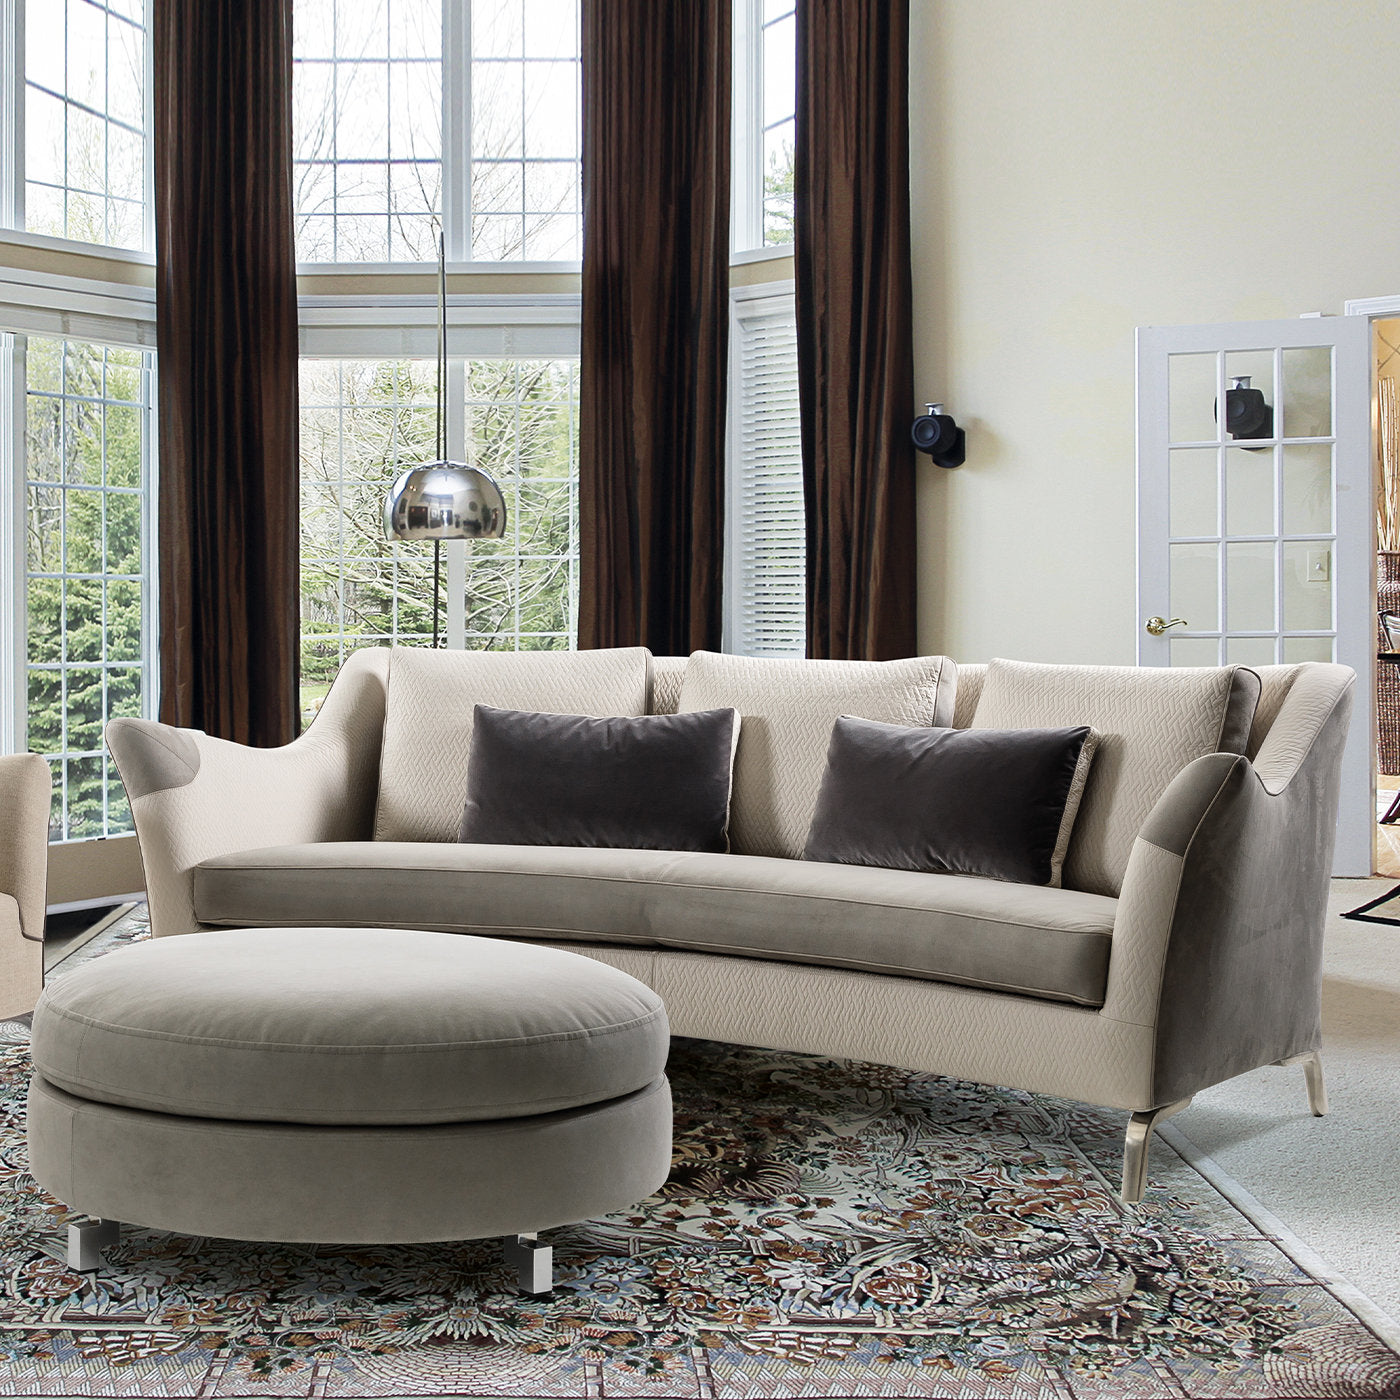 Patterned Beige and Taupe Sofa - Alternative view 1